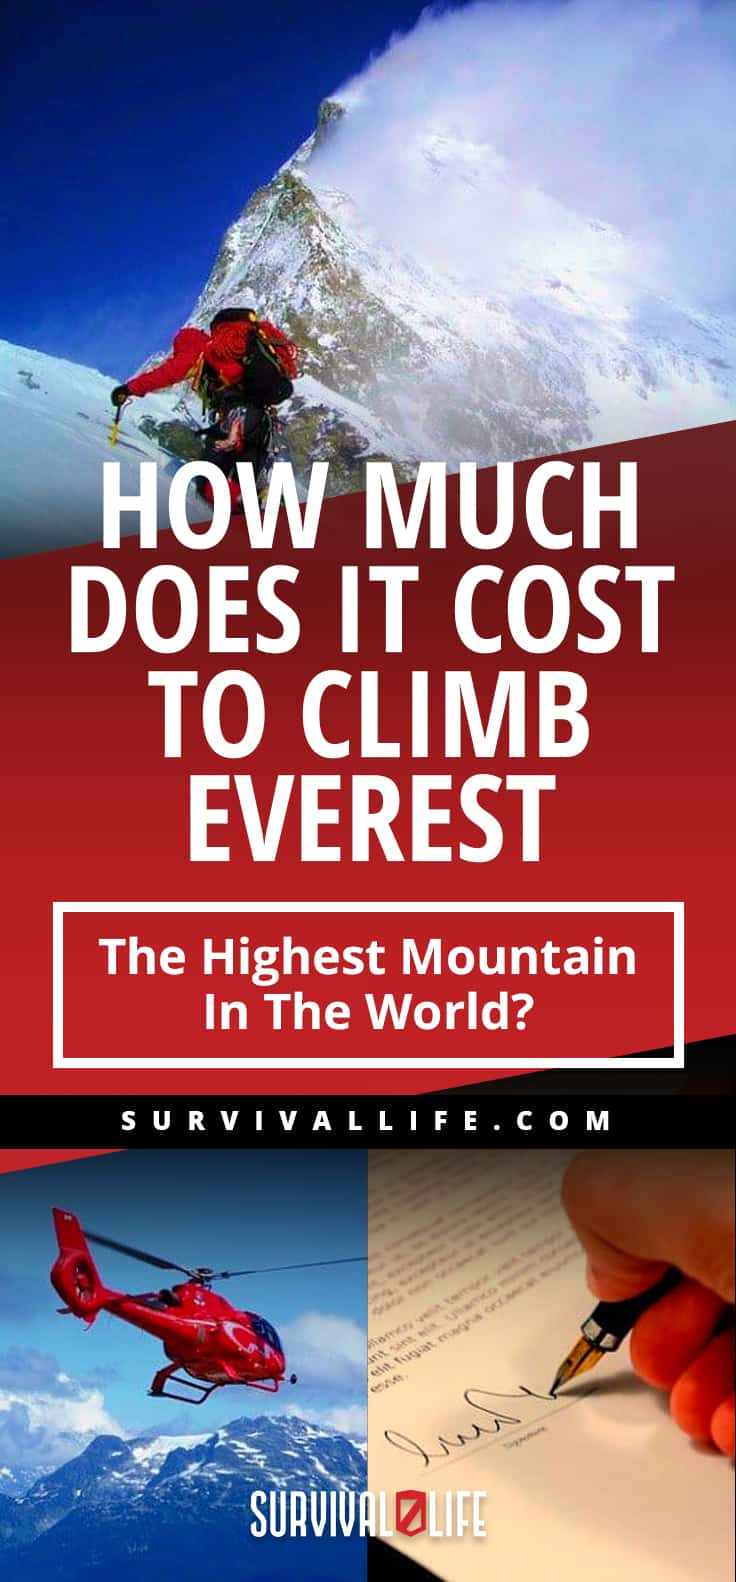 How Much Does It Cost To Climb Everest, The Highest Mountain In The World?